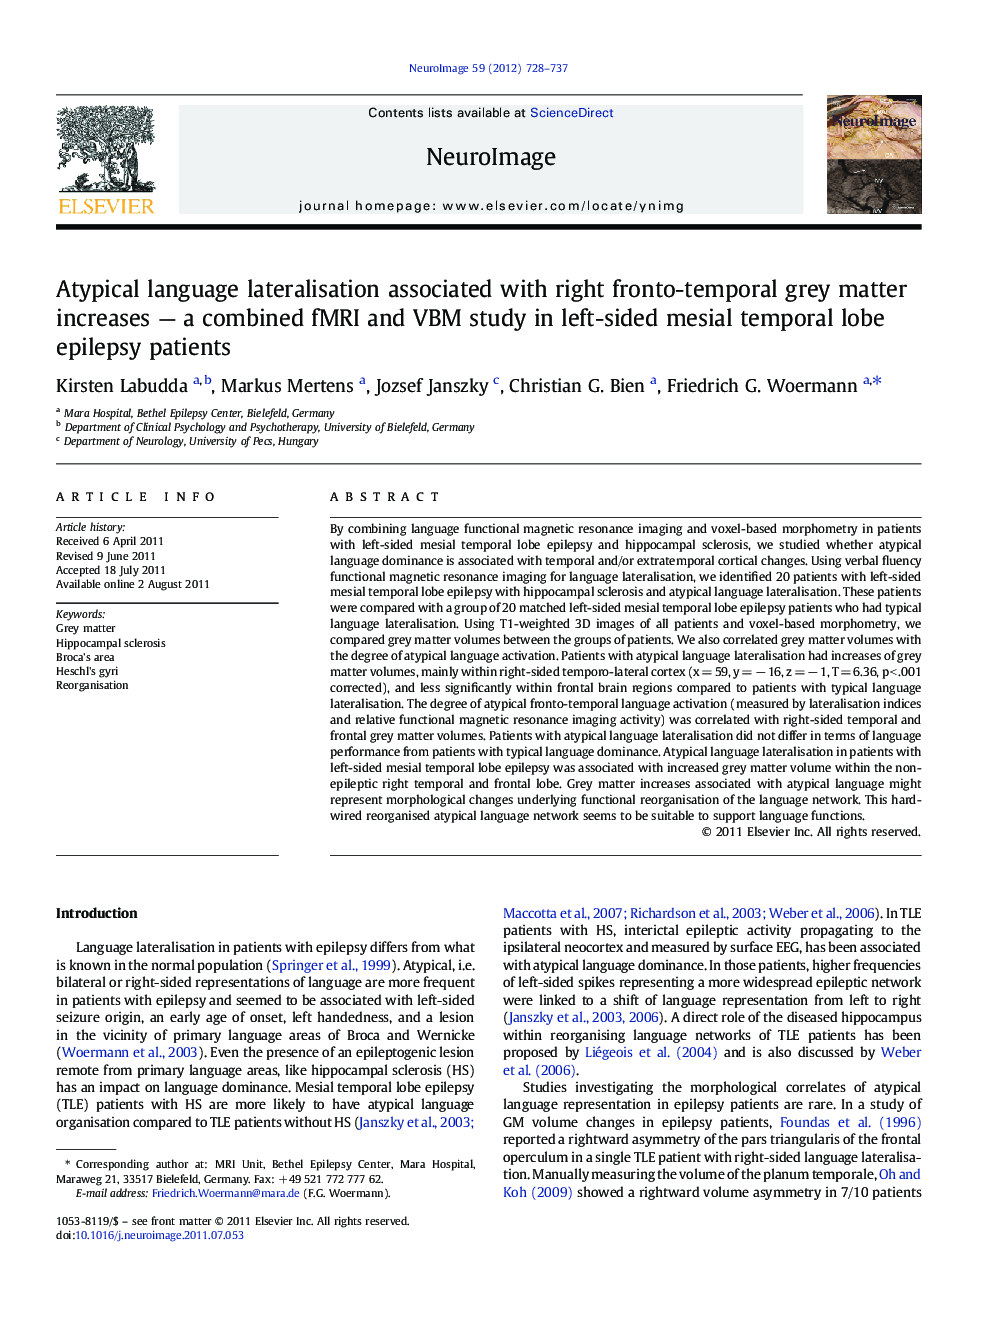 Atypical language lateralisation associated with right fronto-temporal grey matter increases - a combined fMRI and VBM study in left-sided mesial temporal lobe epilepsy patients